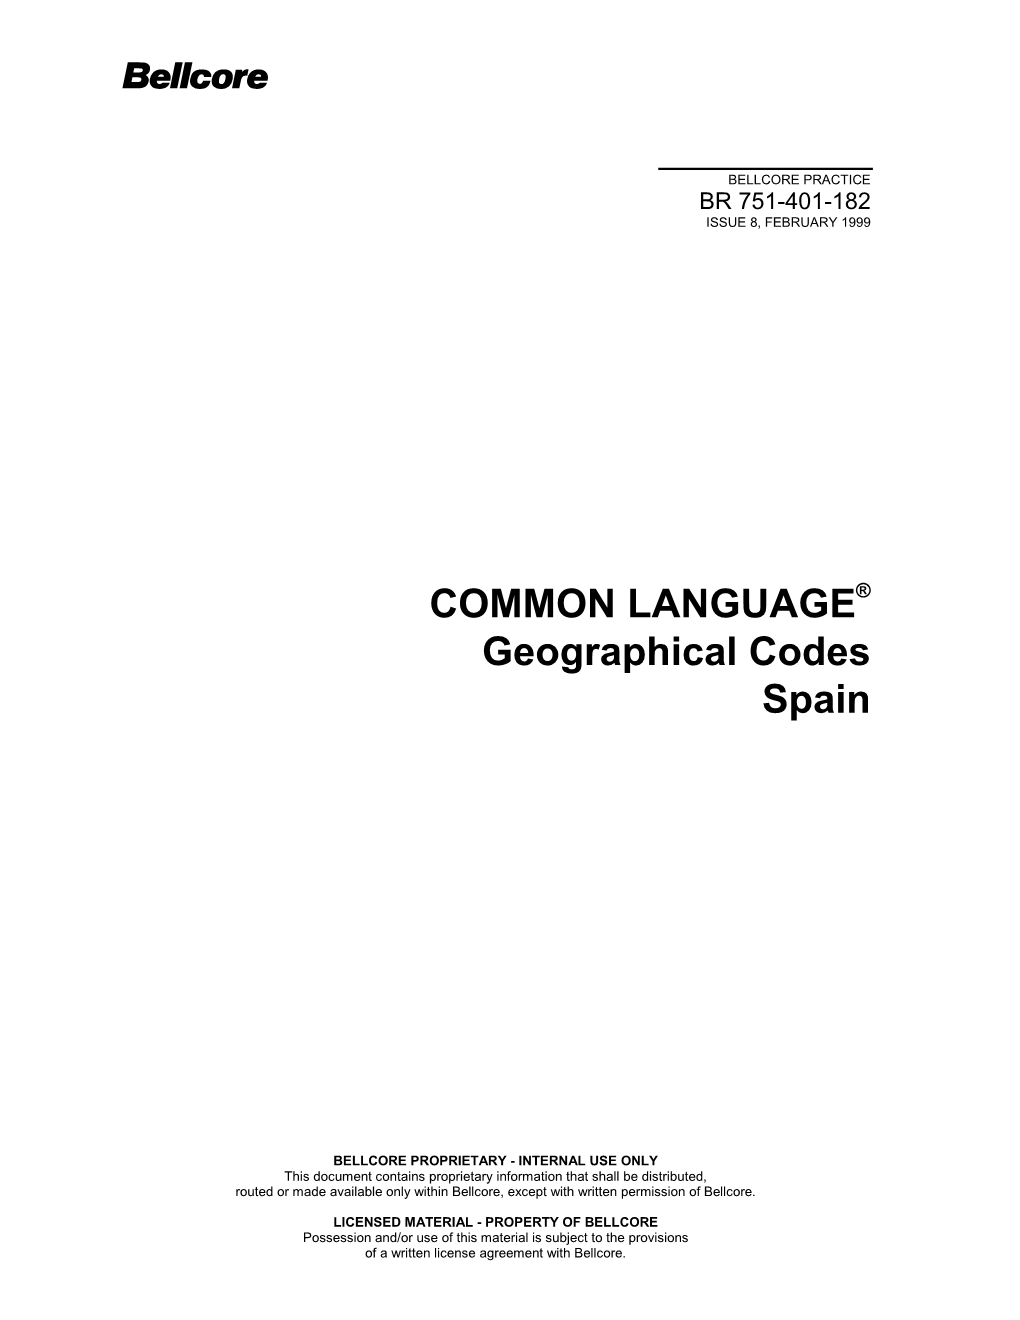 Common Language(R) Geographical Codes Spain